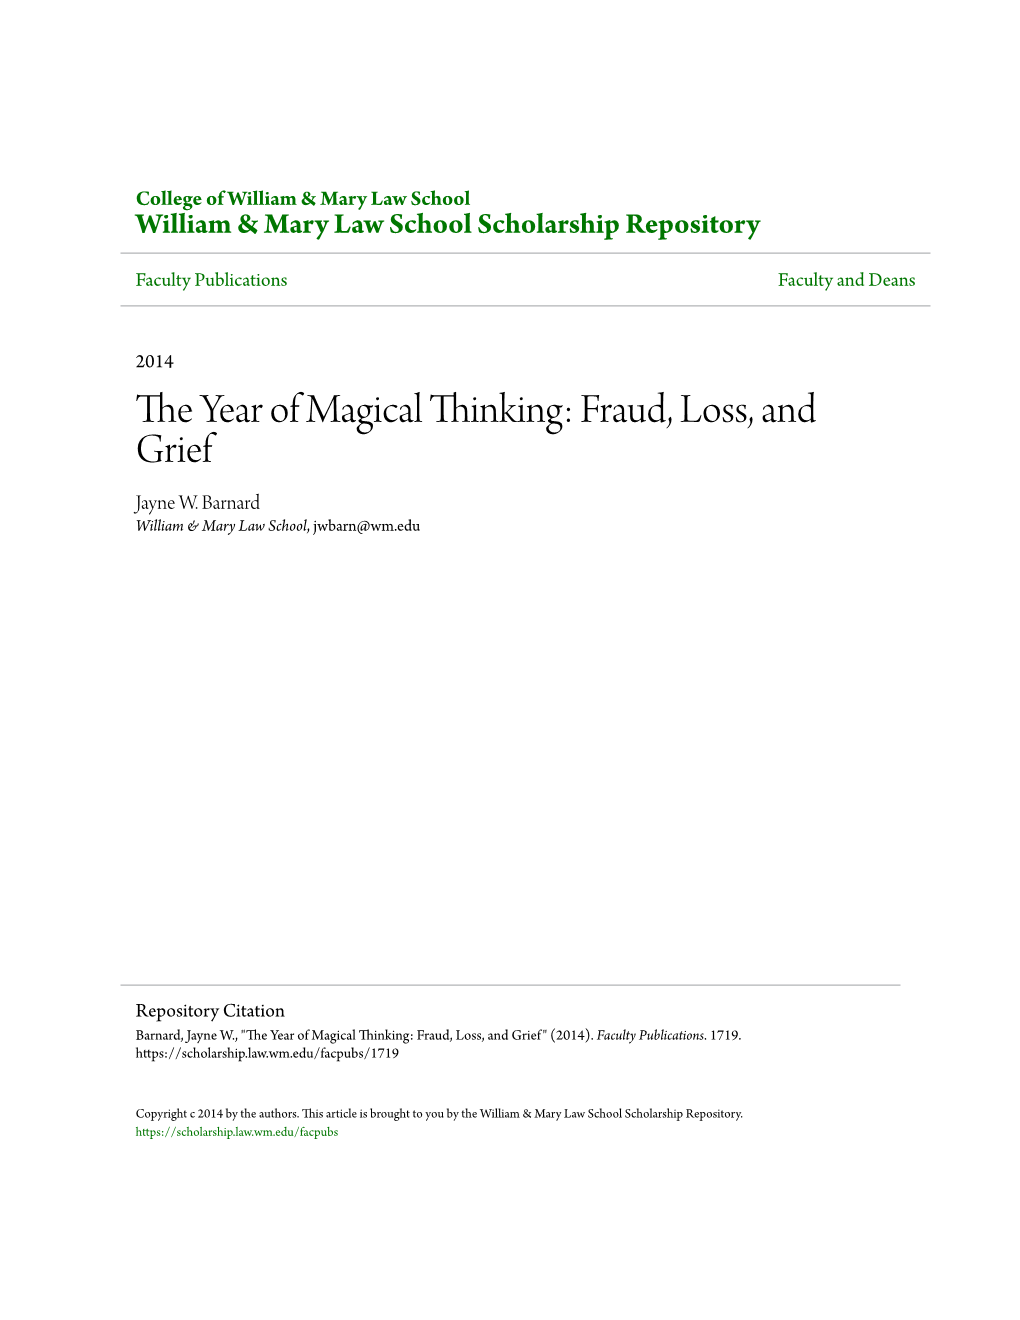 THE YEAR of MAGICAL THINKING: FRAUD, Loss, and GRIEF